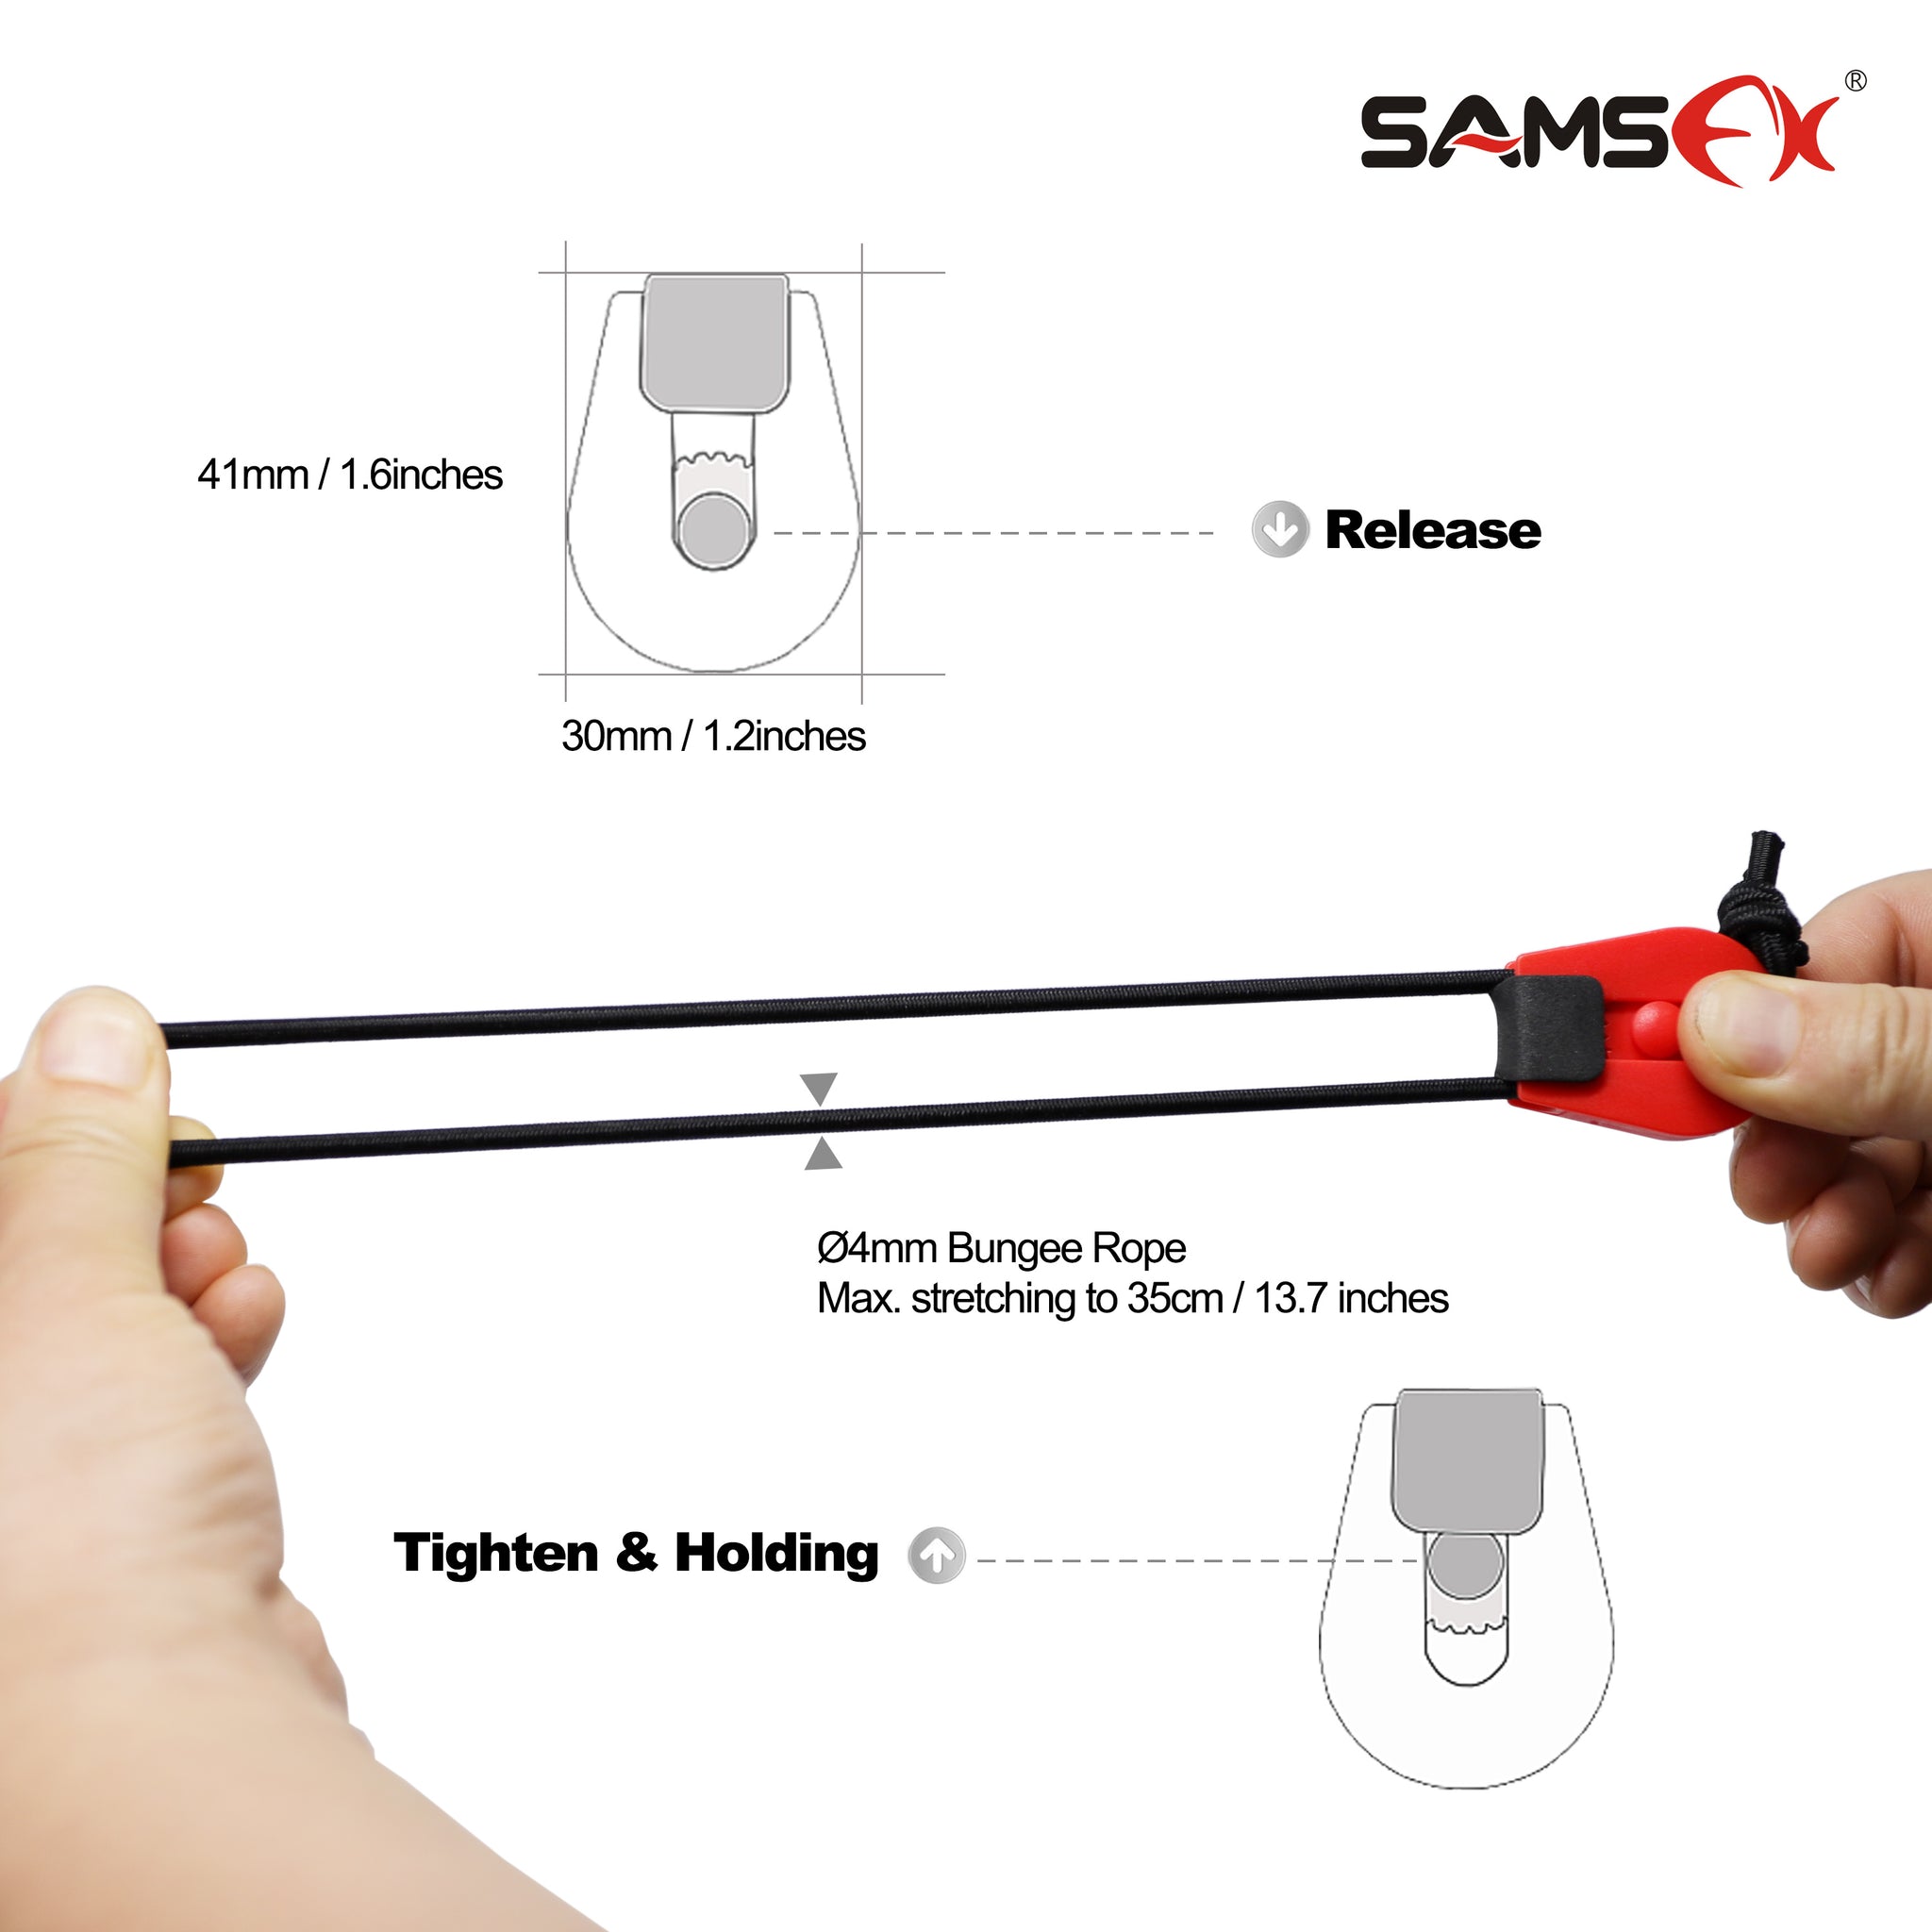 SAMSFX Fishing Rods Belt Stretchy Wrap Pole Straps Elastic Cable Ties for  Casting Rods, Spinning Rods & Fly Rods (Black & Red, 2